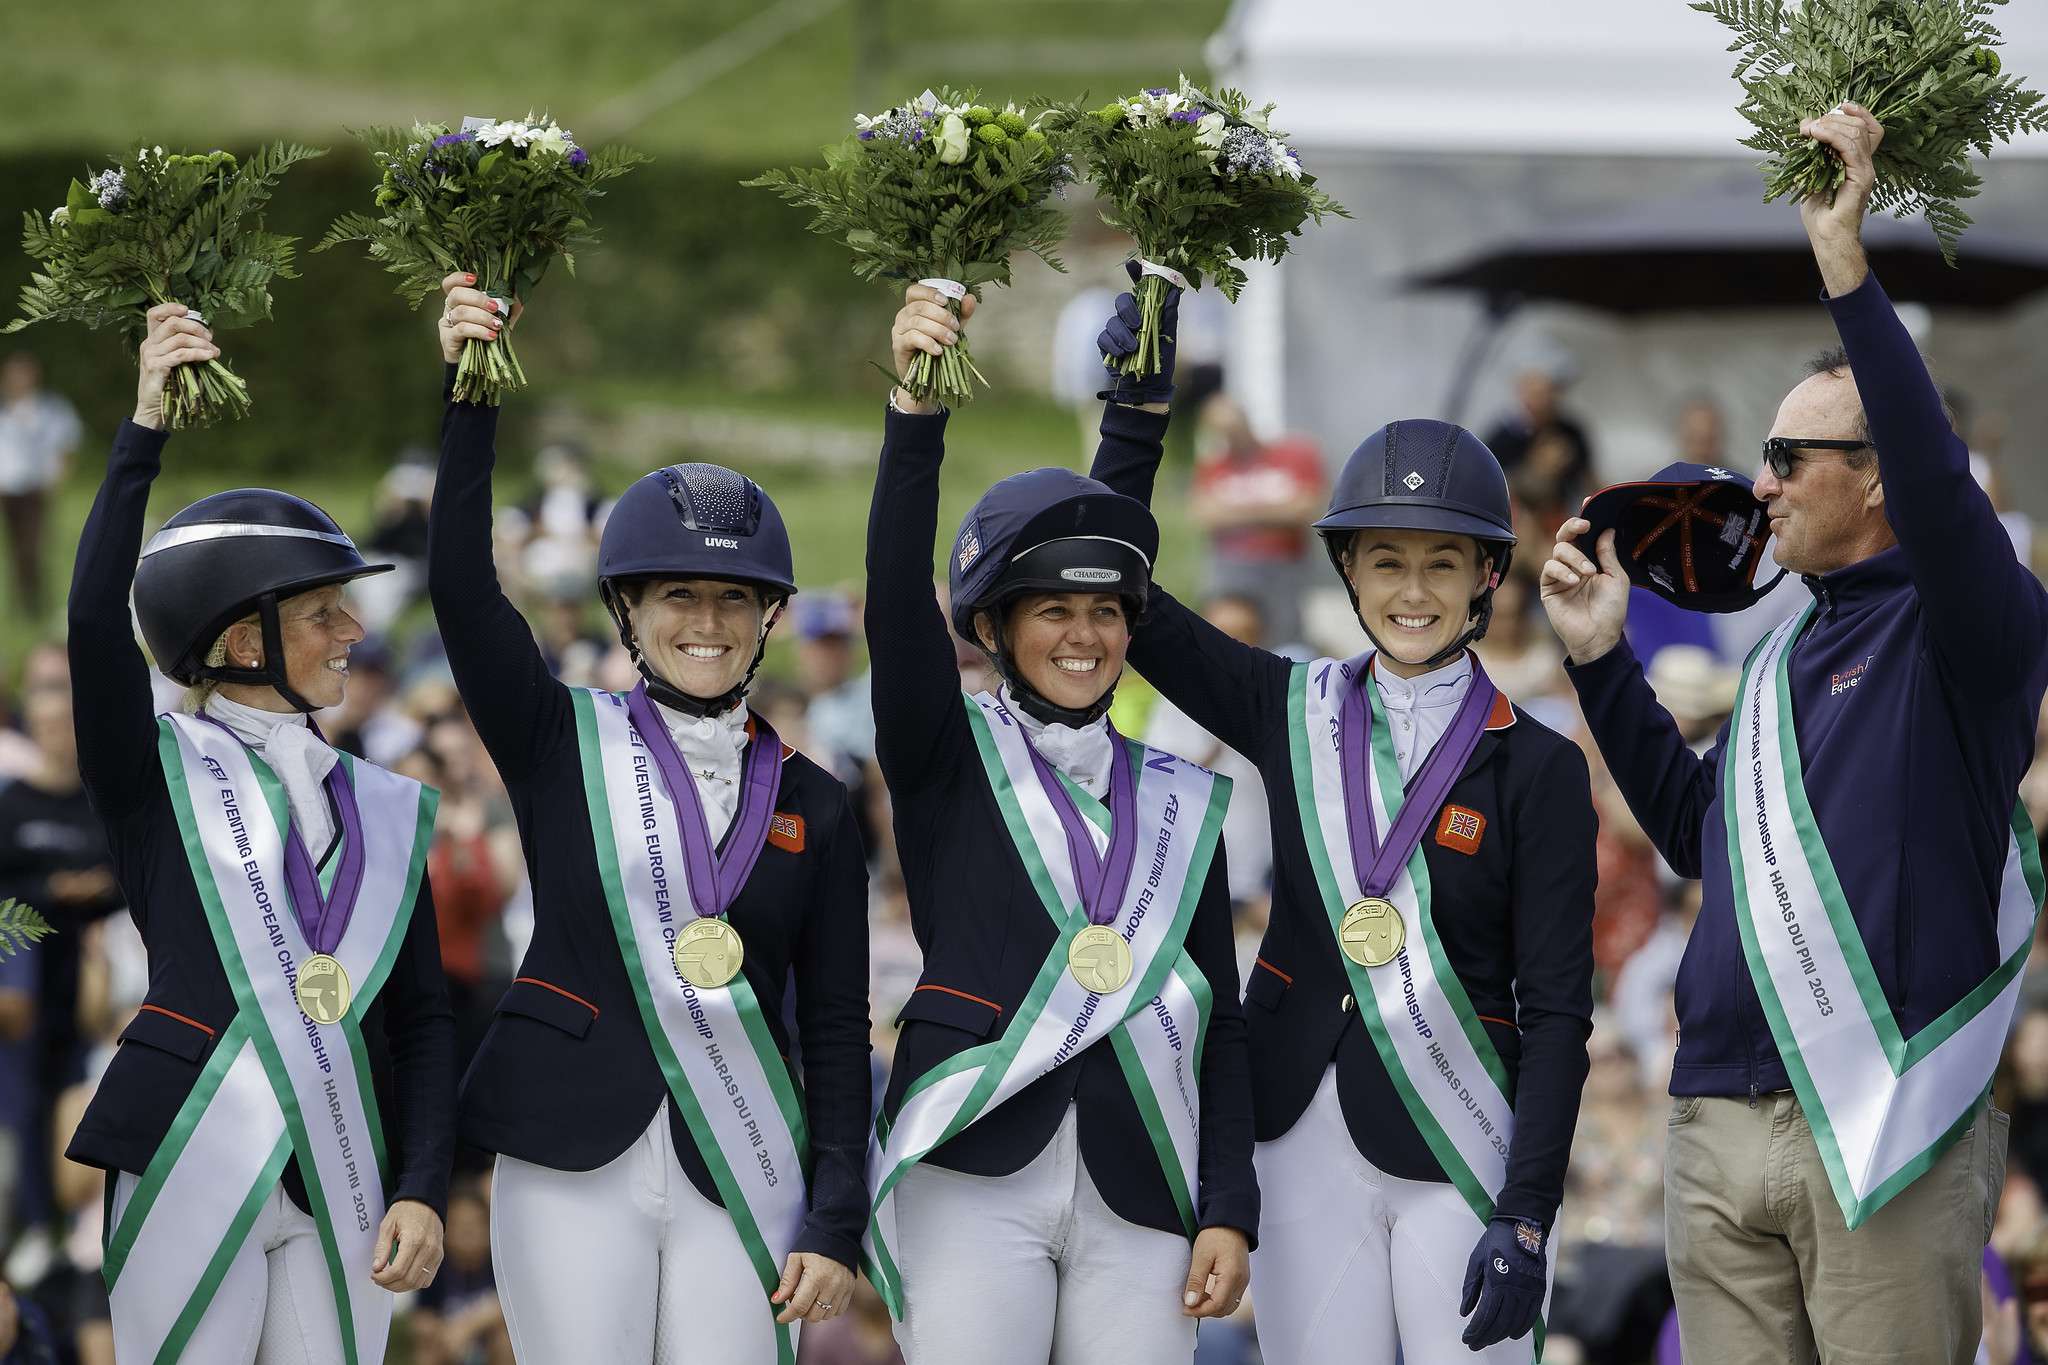 Team GOLD - Team Great Britain: Rosalind Canter; Laura Collett; Kitty King; Yasmin Ingham and Chef d'Equipe Richard Waygood. The Medal Ceremony. 2023 FRA-FEI Eventing European Championships | Haras du Pin, France. Sunday 13 August 2023. Copyright Photo: FEI/Libby Law Photography